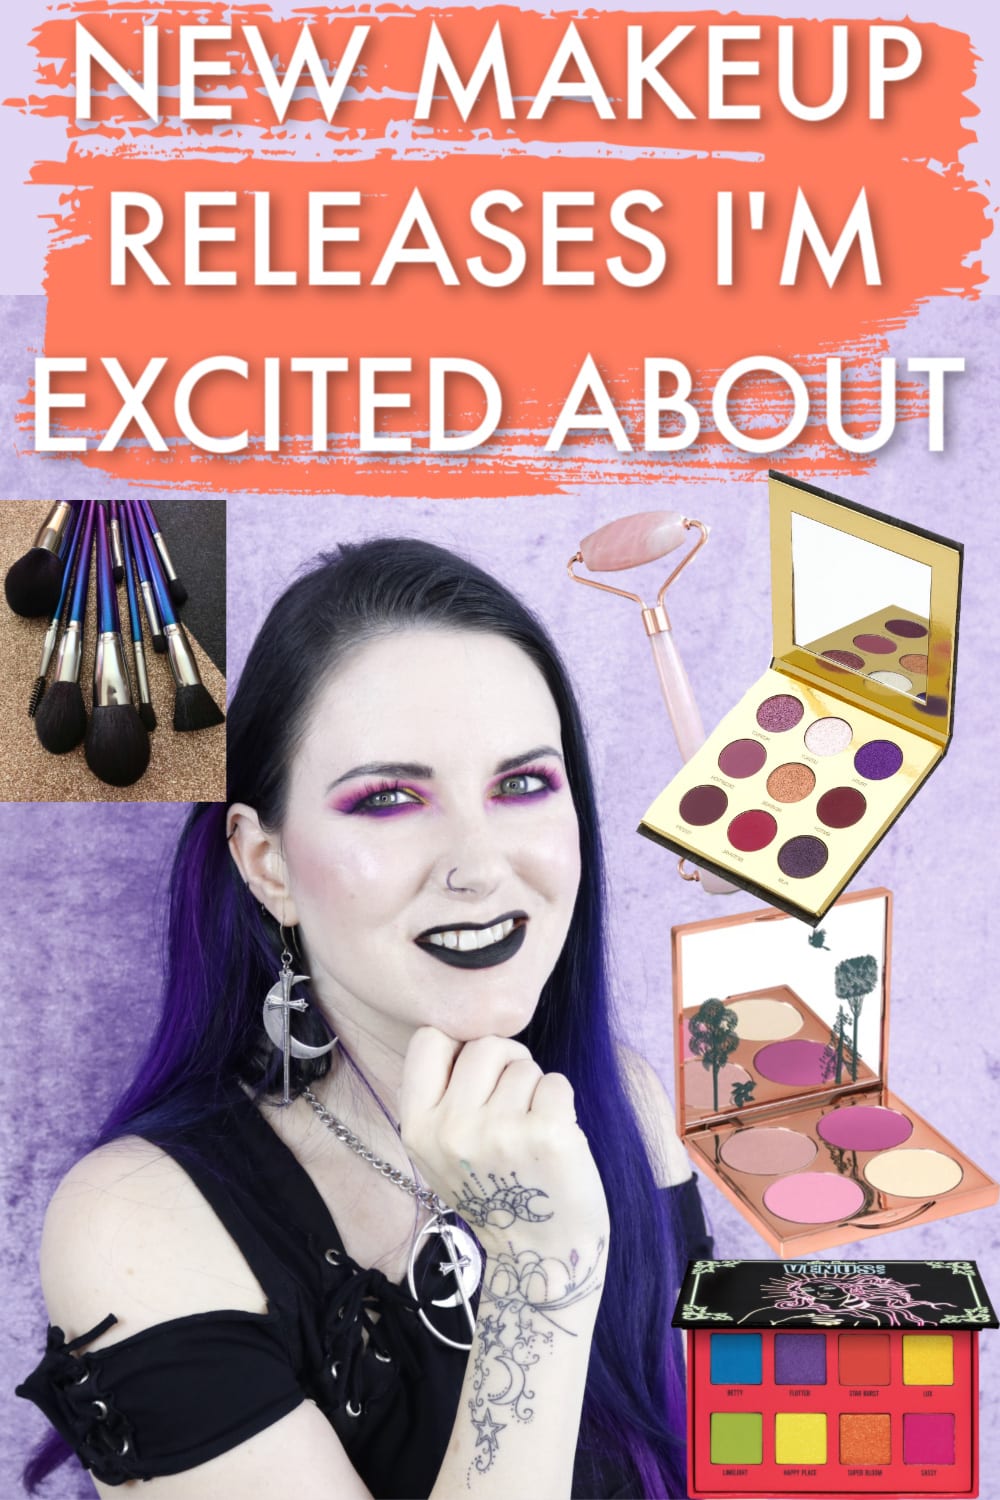 New Makeup Releases I’m Excited For